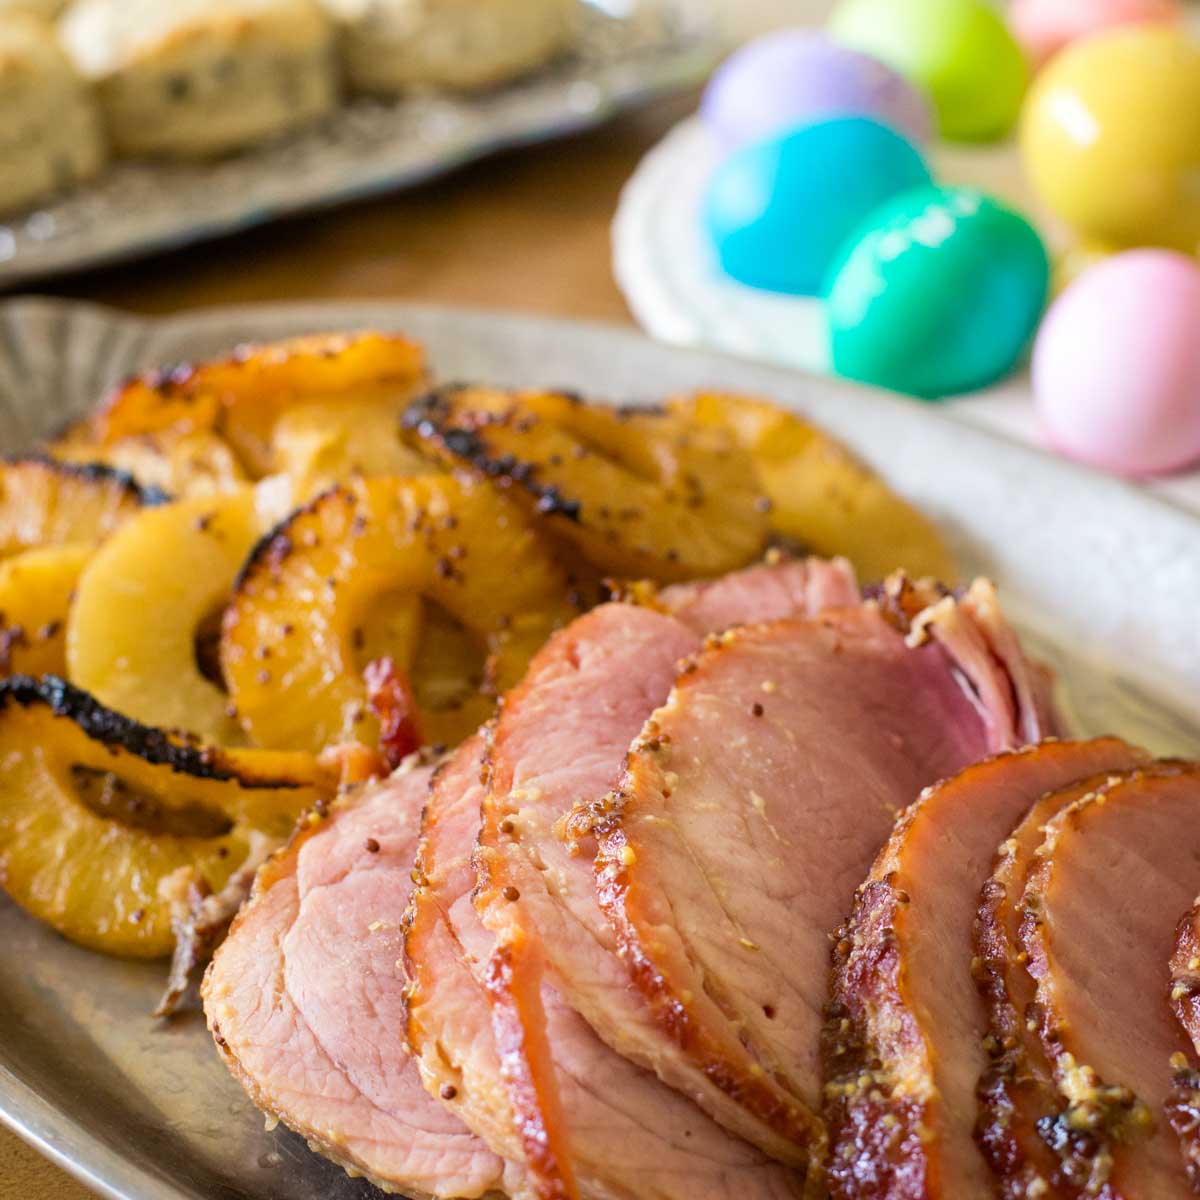 Slices of pineapple glazed ham sits on a platter next to the roasted pineapple slices. A tray of colorful Easter eggs sits in the background.